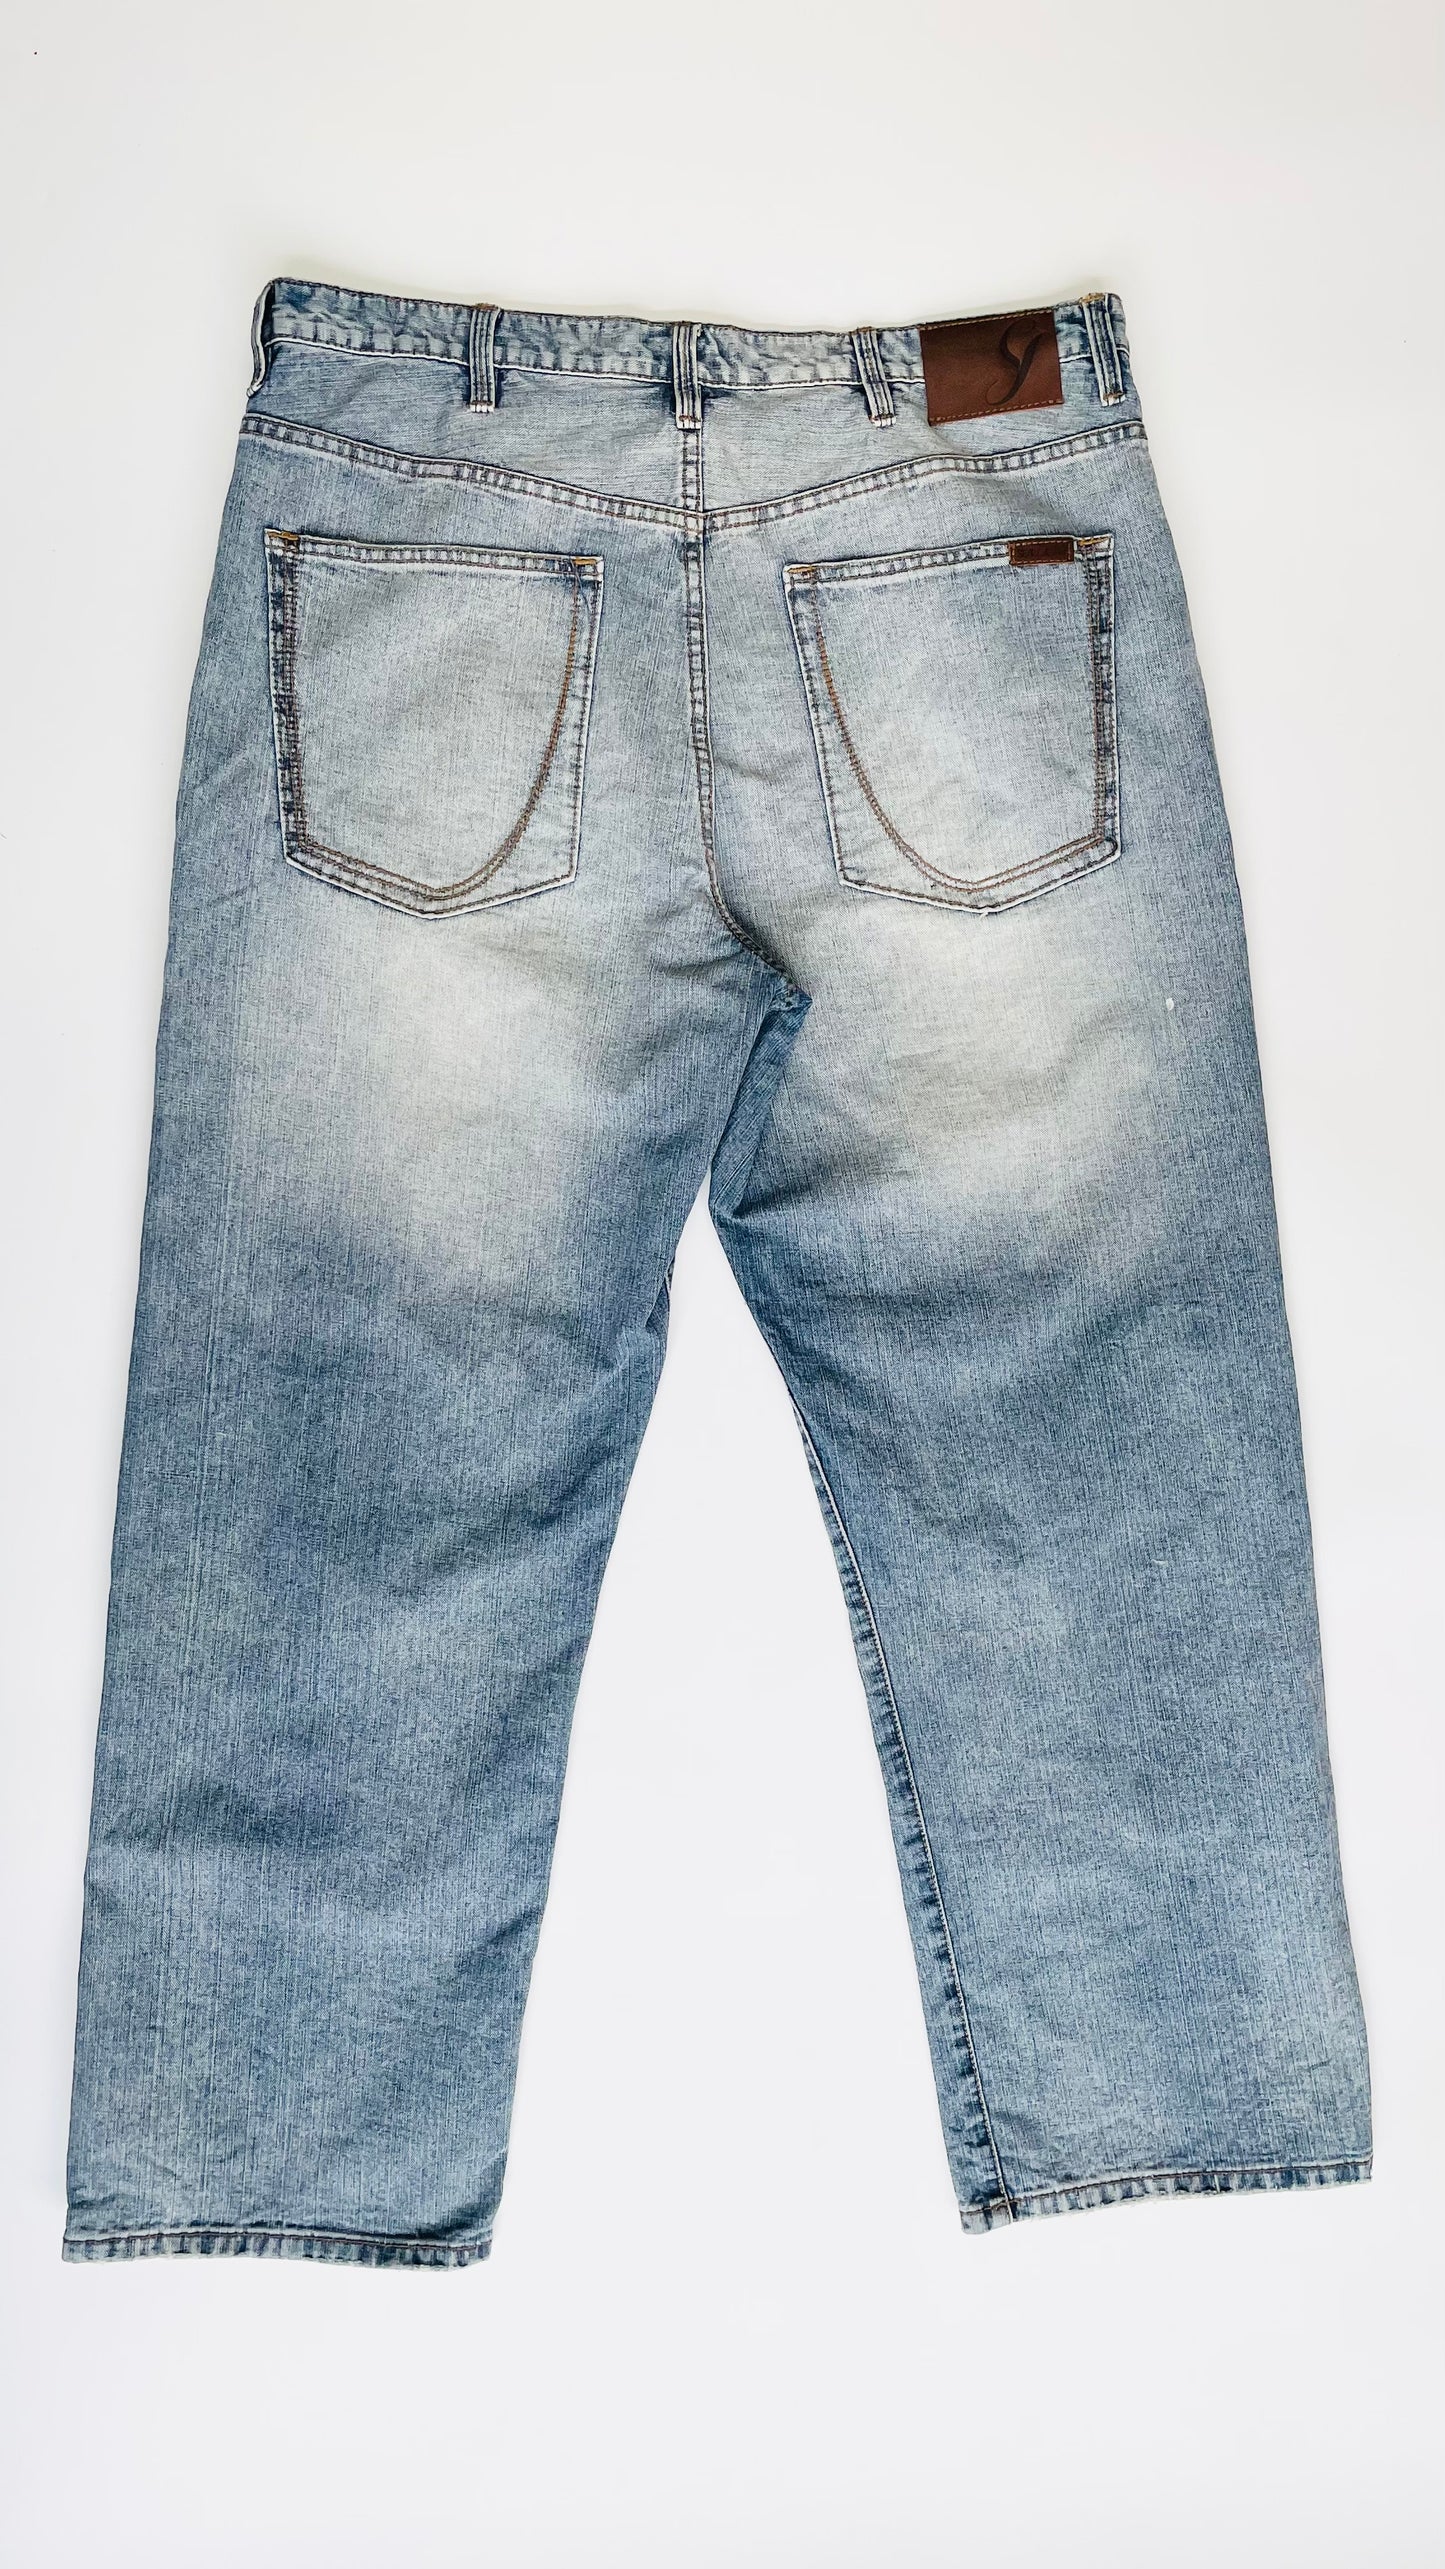 90s Sean John grey washed jeans - Size 38